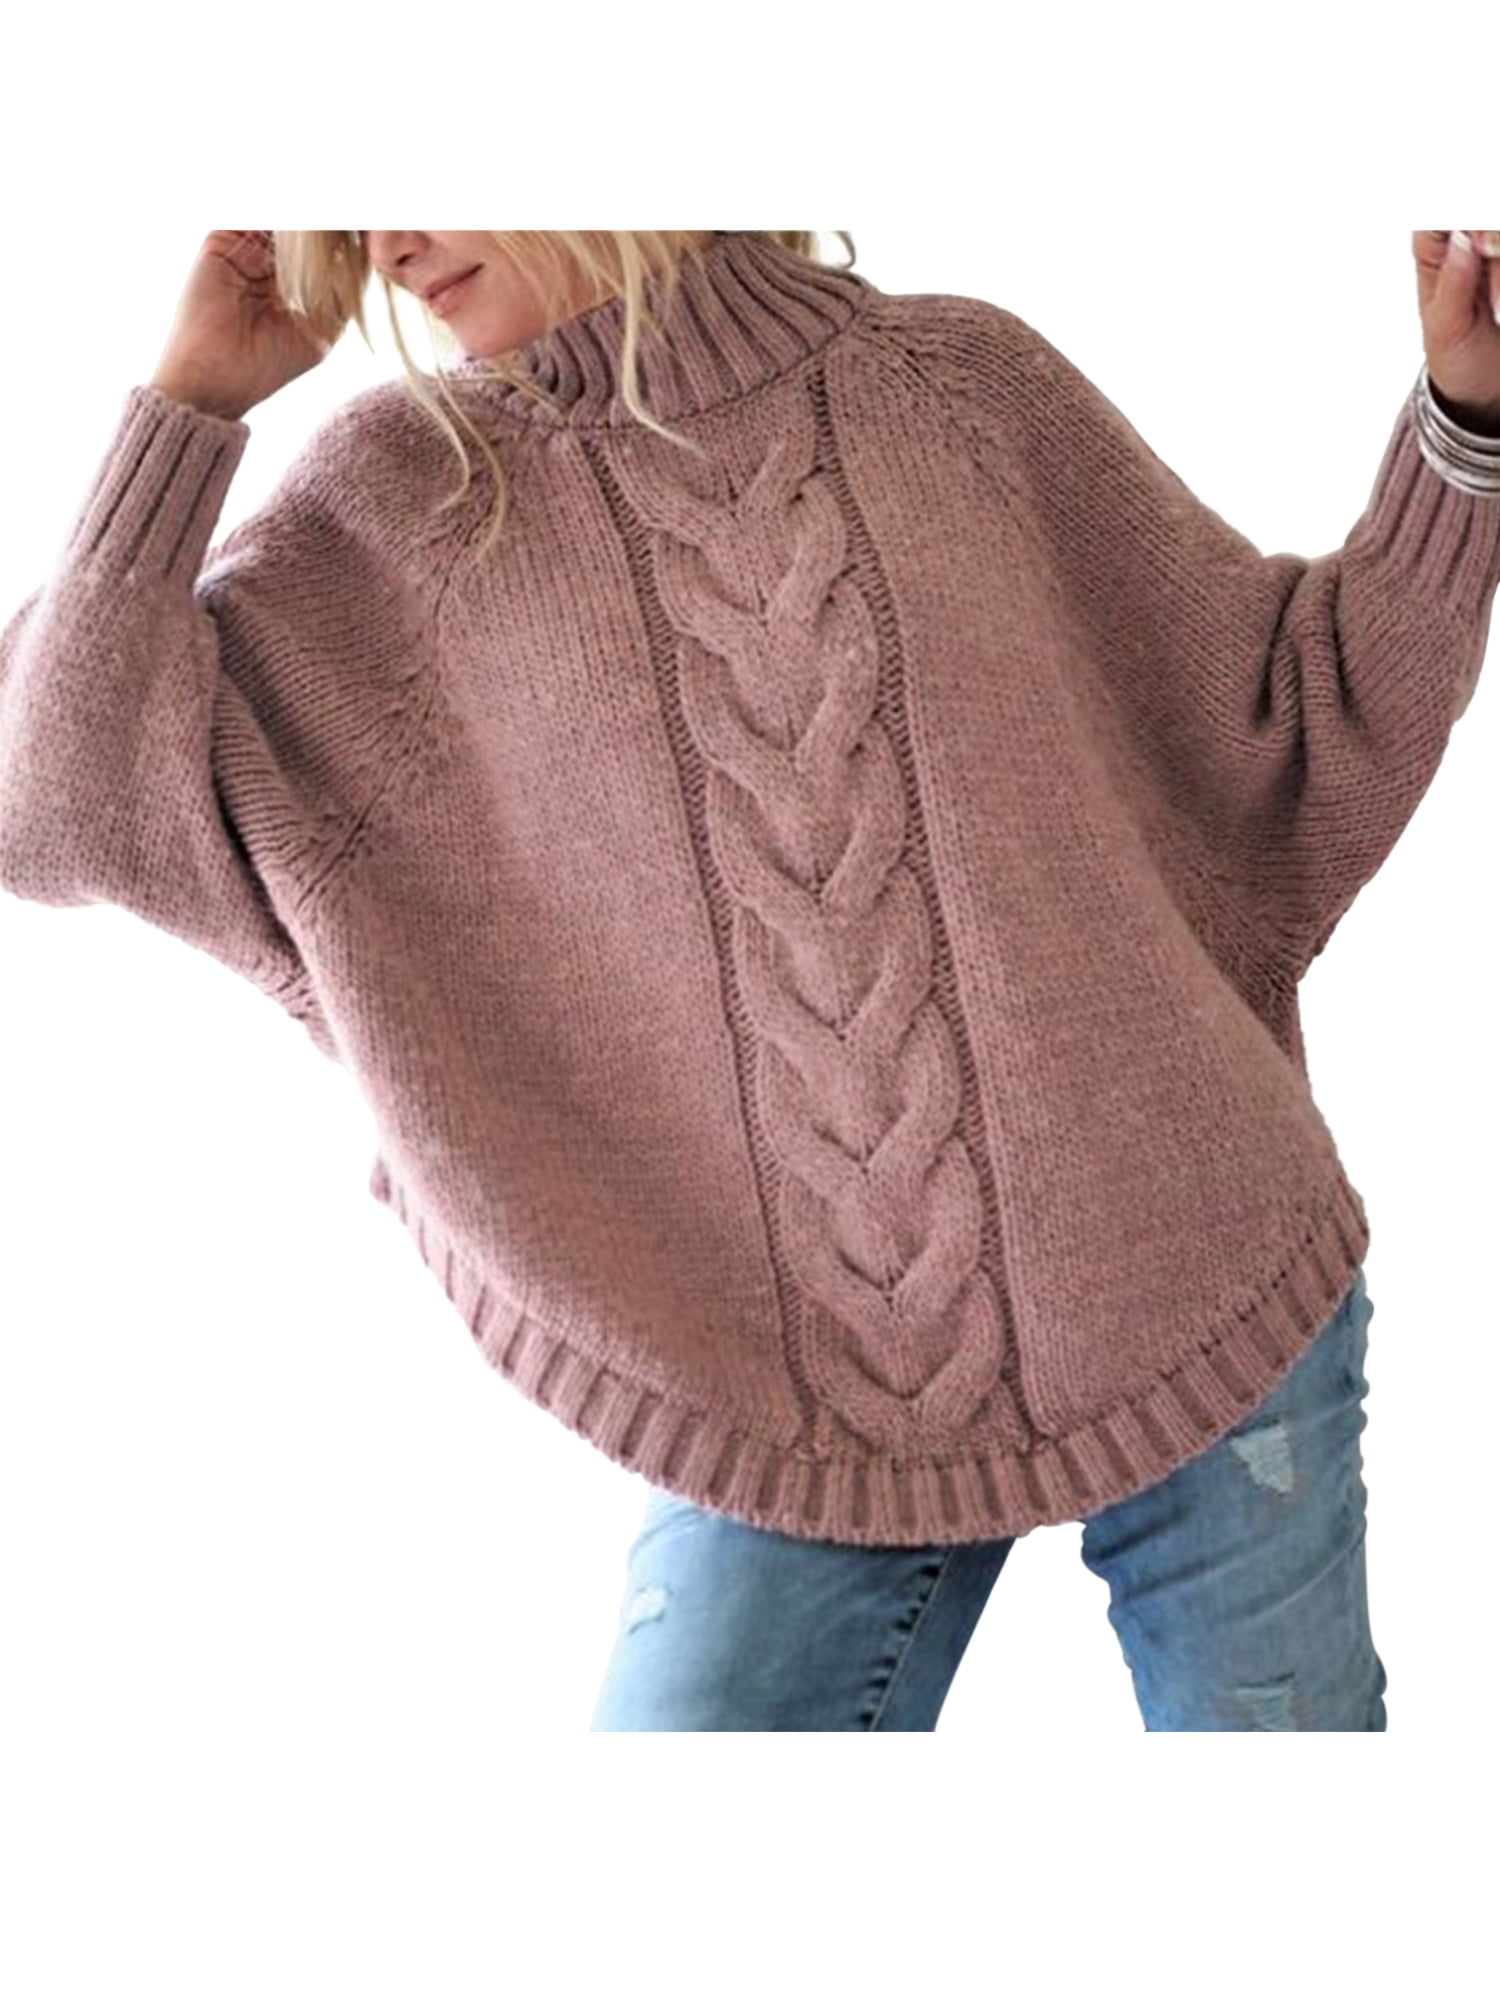 New Diamond Knit Long Sleeve Cable Jumper Short Sweeter Ladies Women Top 100% Acrylic 8-18